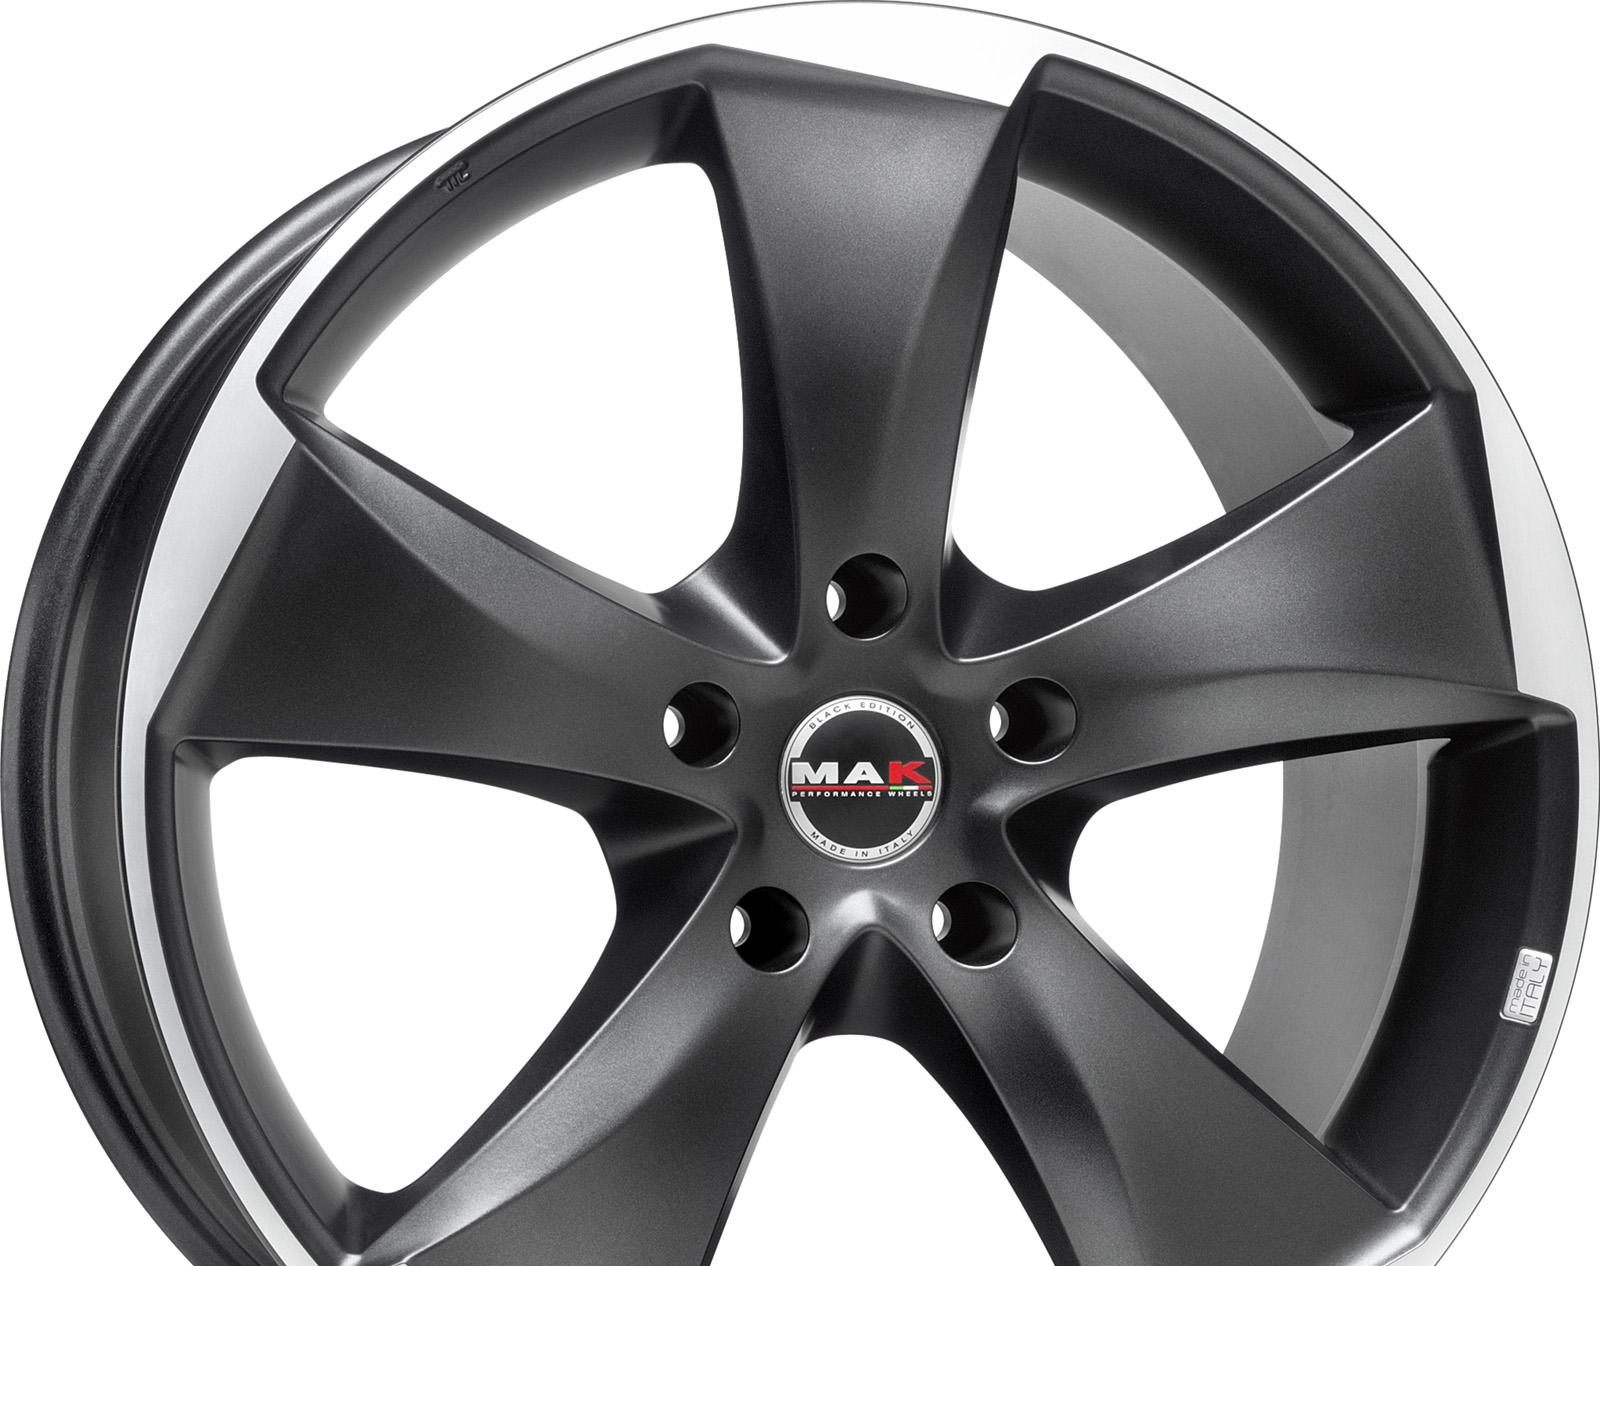 Wheel Mak Raptor 5 Graphite-MirFace 19x8.5inches/5x120mm - picture, photo, image